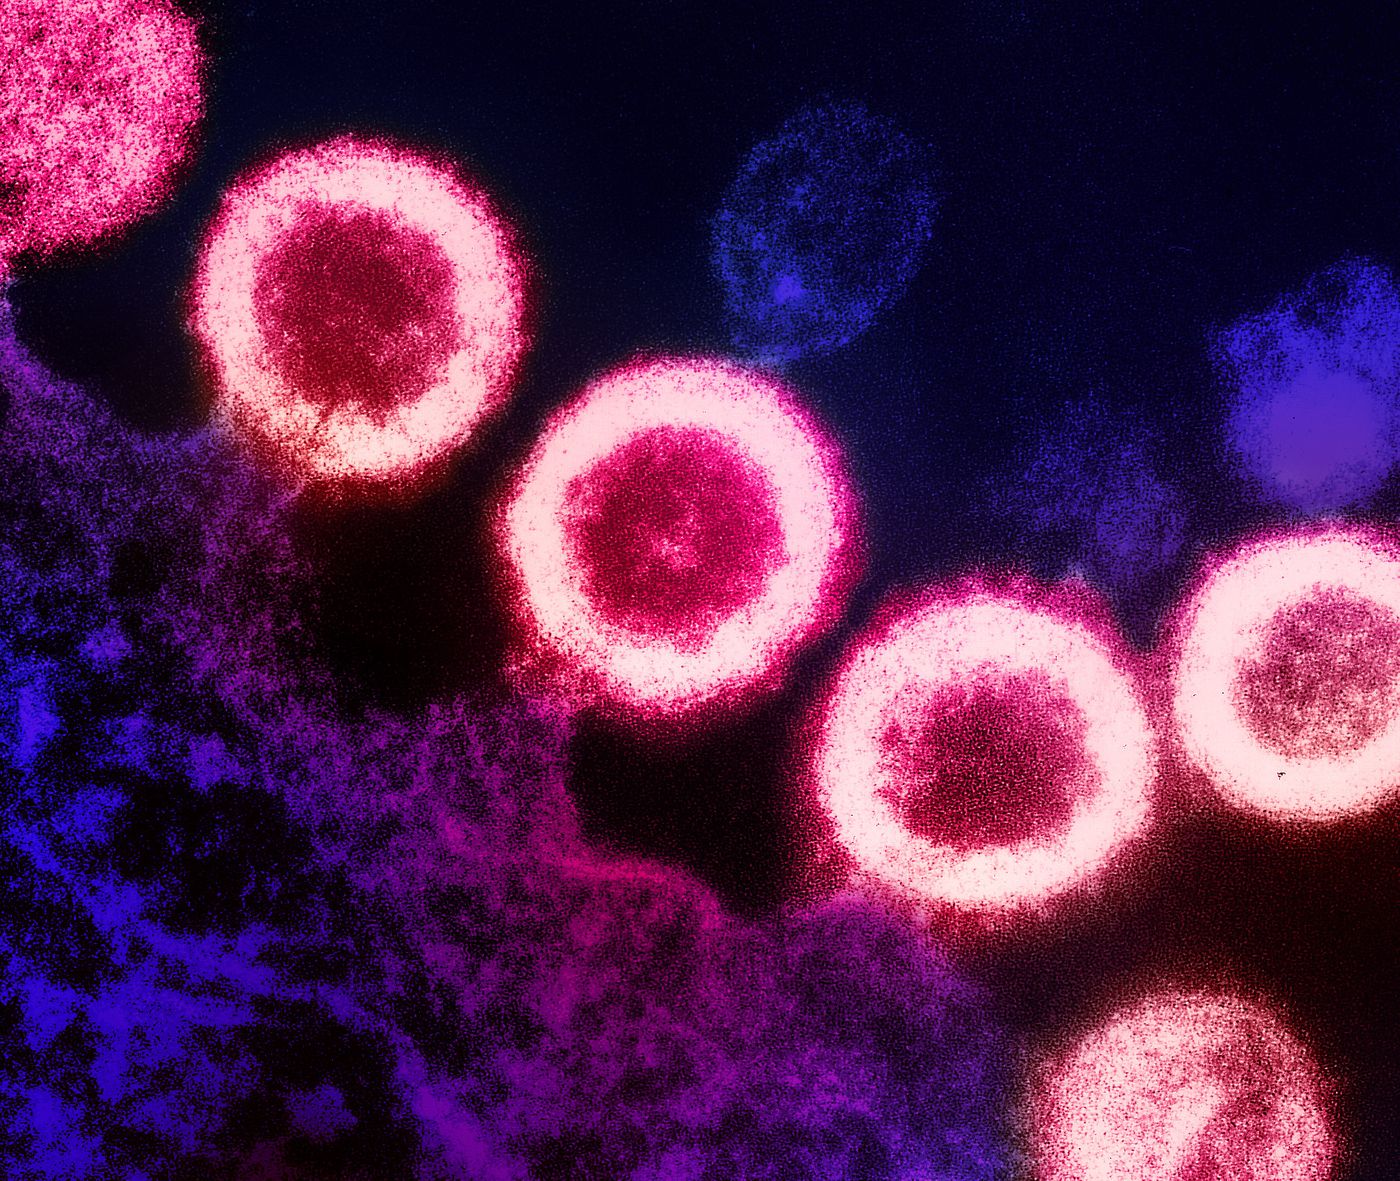 ransmission electron micrograph of HIV-1 virus particles (pink) replicating from the plasma membrane of an infected H9 T cell (purple). Image captured at the NIAID Integrated Research Facility (IRF) in Fort Detrick, Maryland. Credit: NIAID